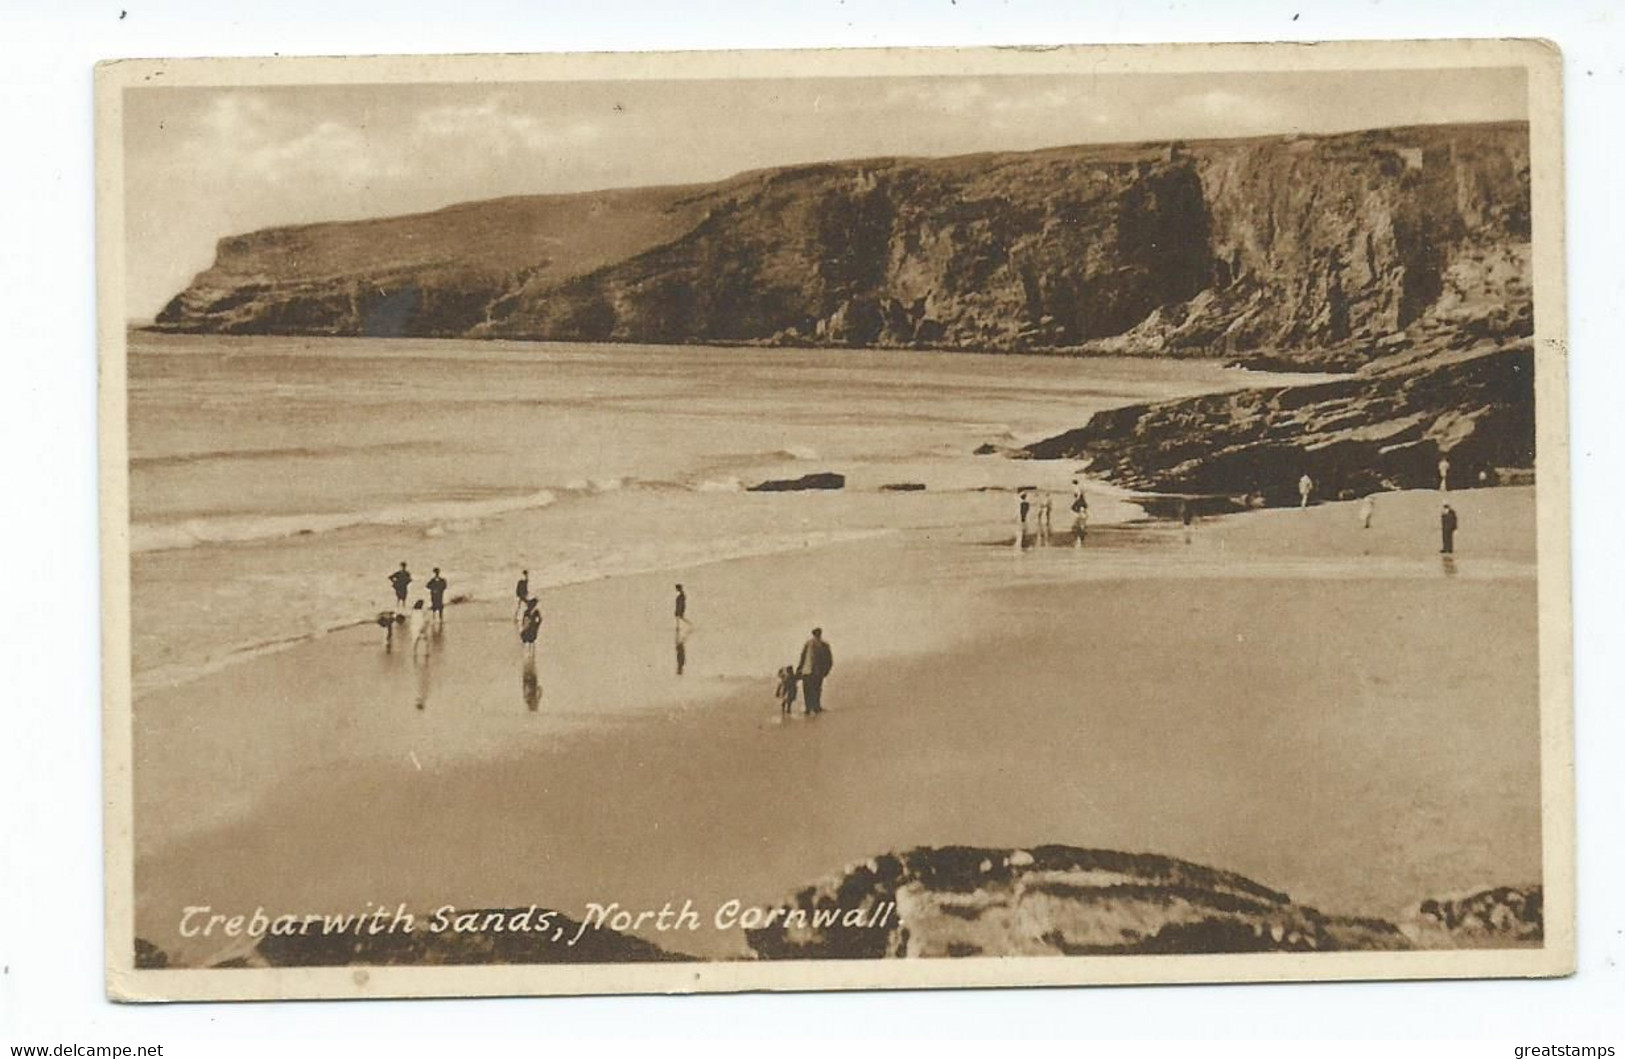 Cornwall  Postcard Unused Trebarwith Sands North Cornbwall Frith's Sepia - Land's End